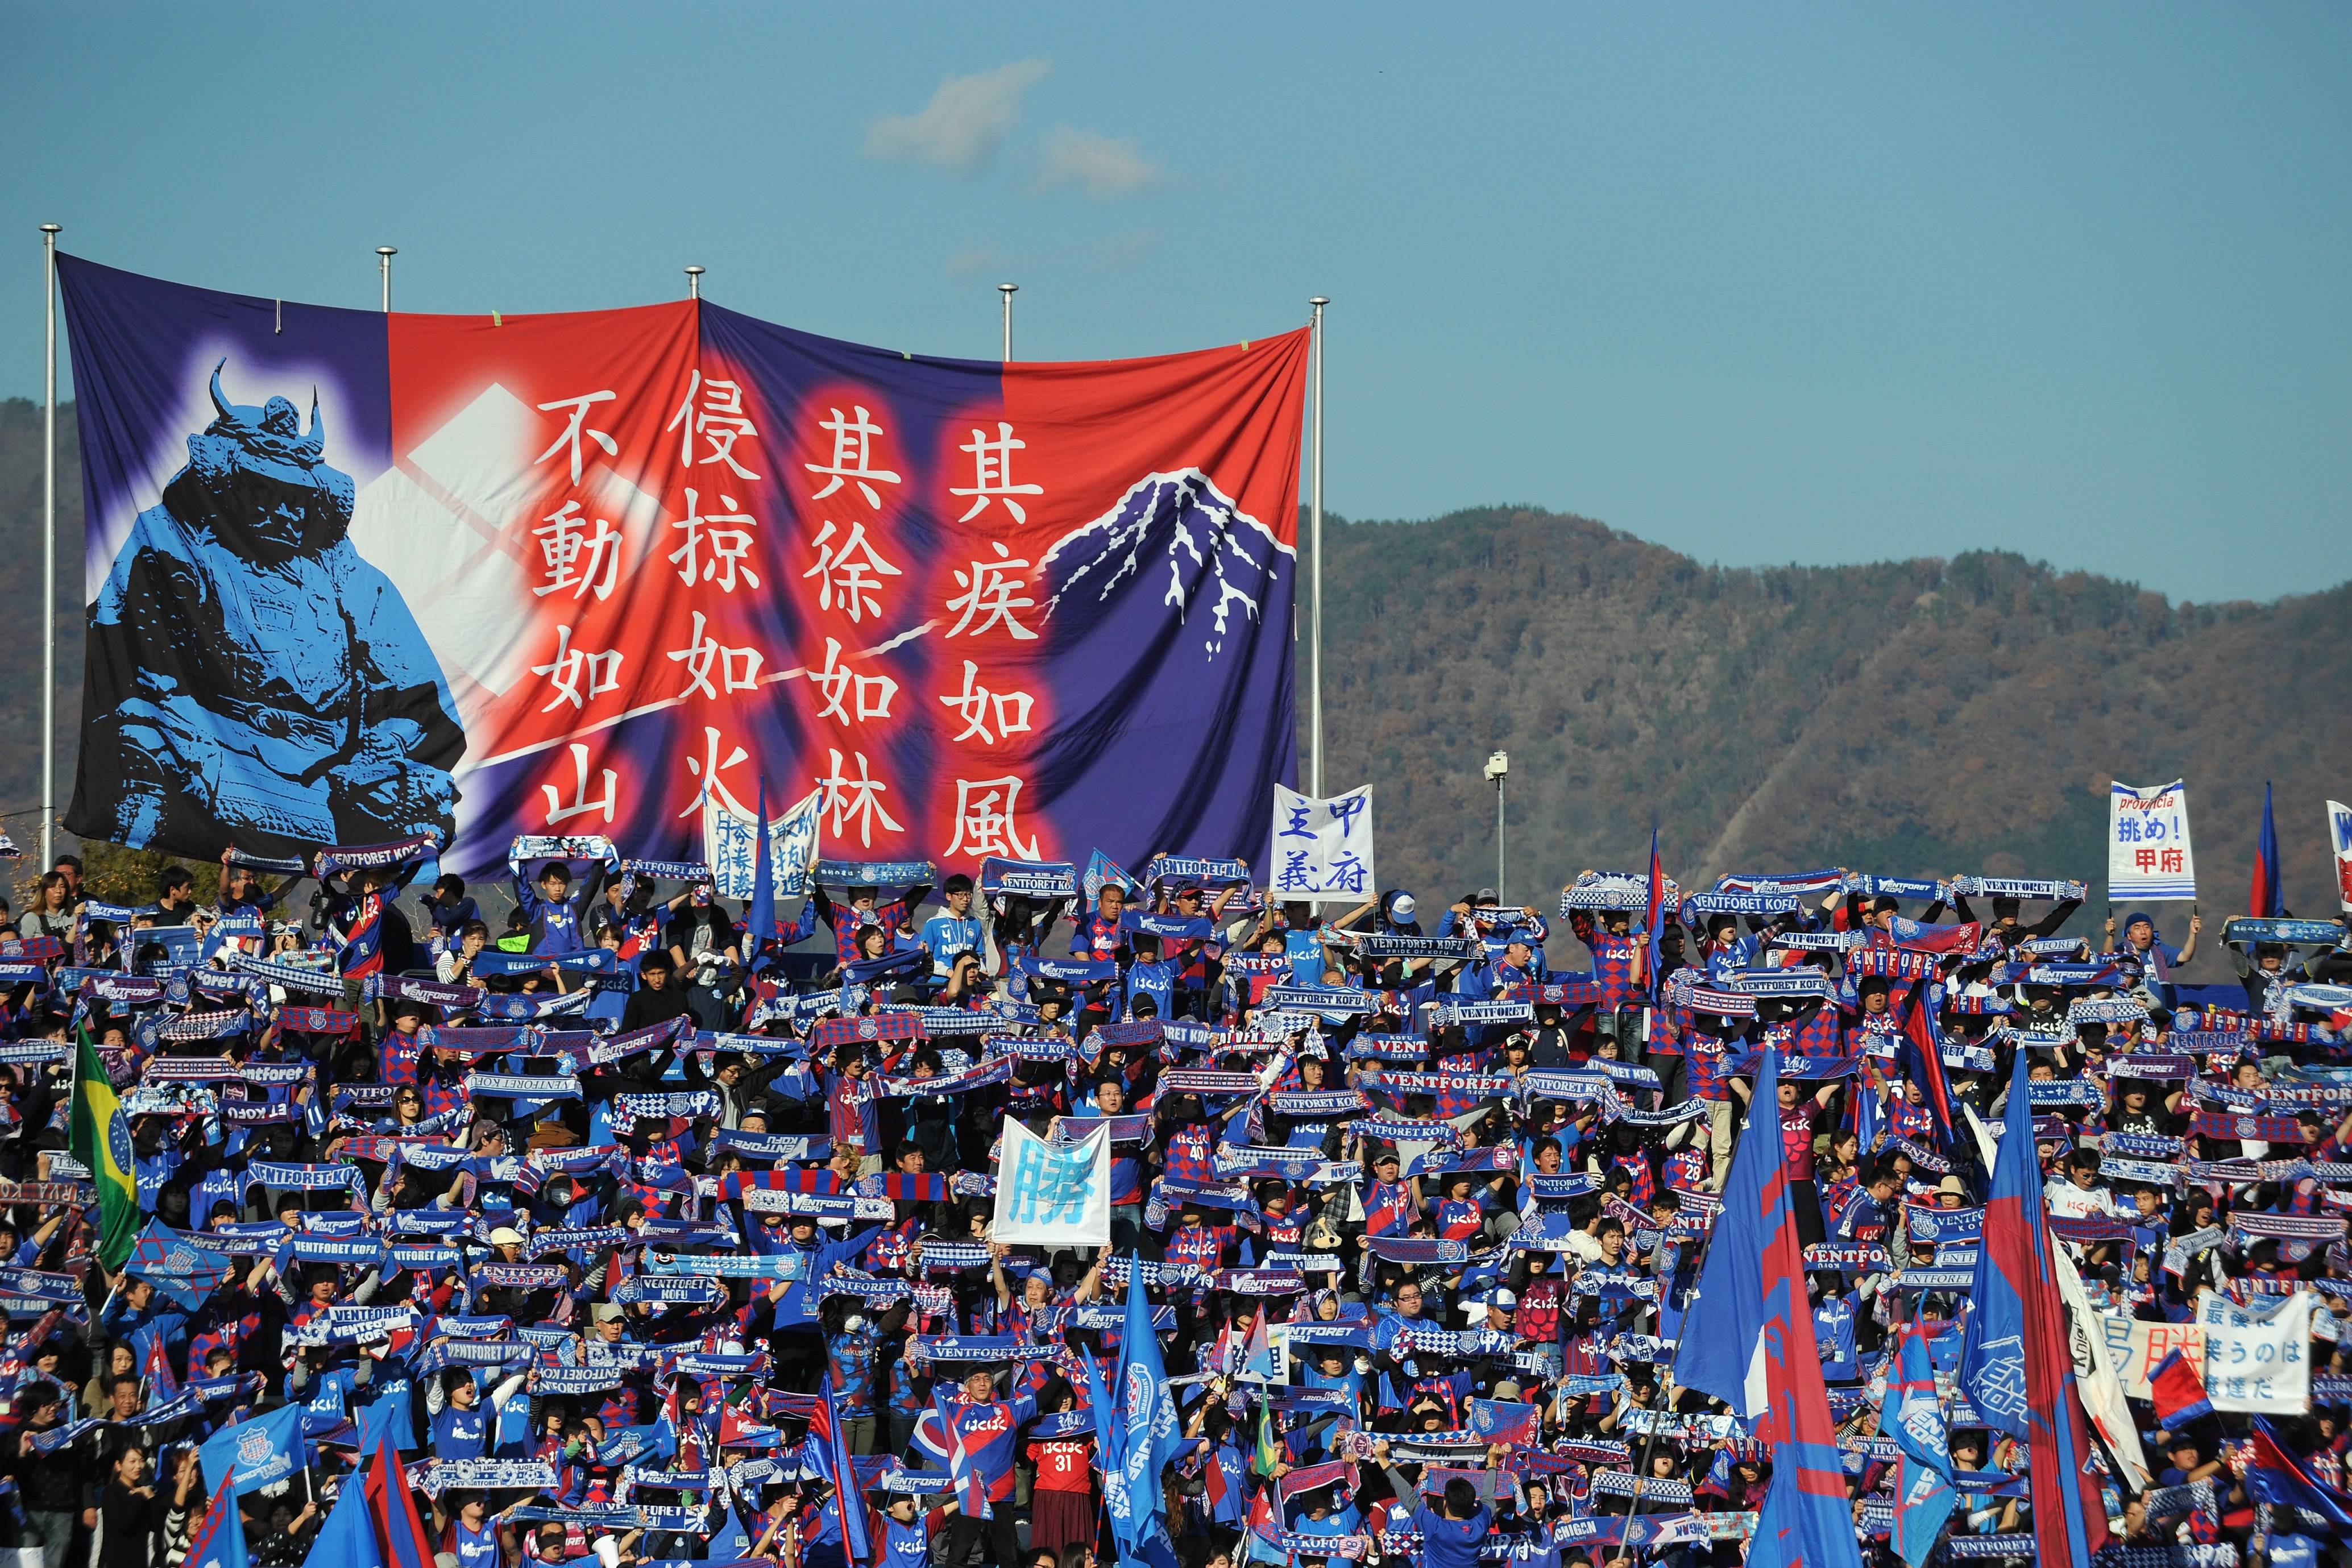 PODWATCH: J-Talk looks at the J2 League